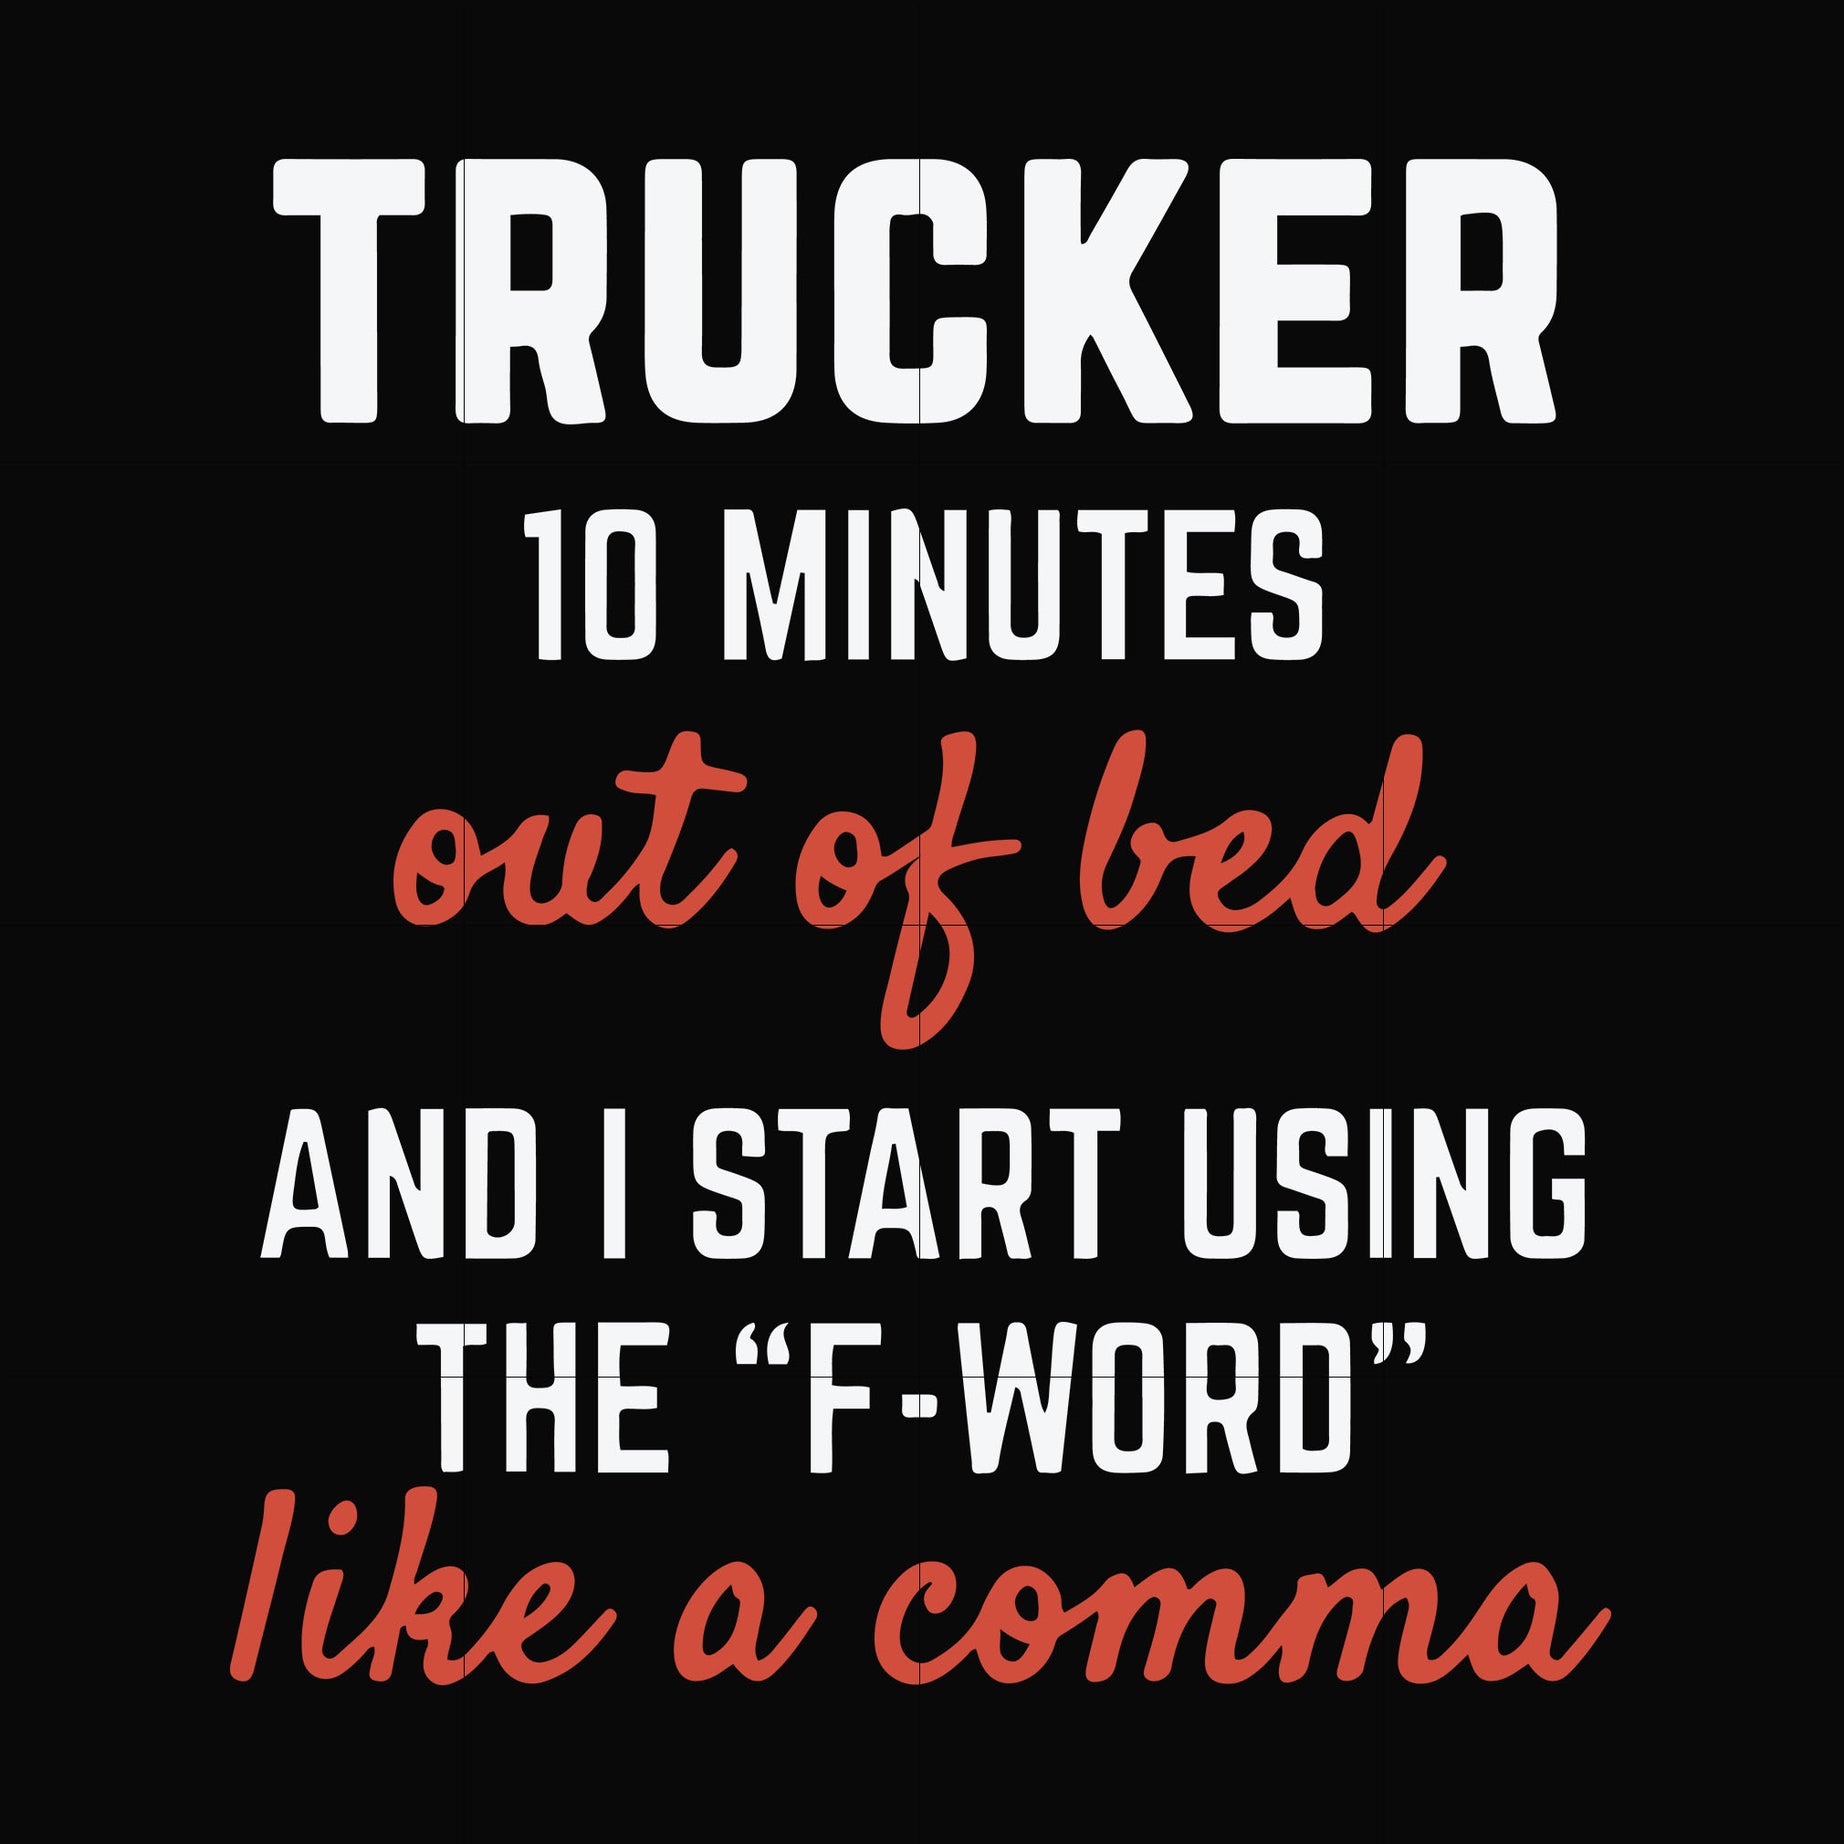 Trucker 10 minutes out of bed and I start using the F-word like a comma svg, png, dxf, eps file FN000621